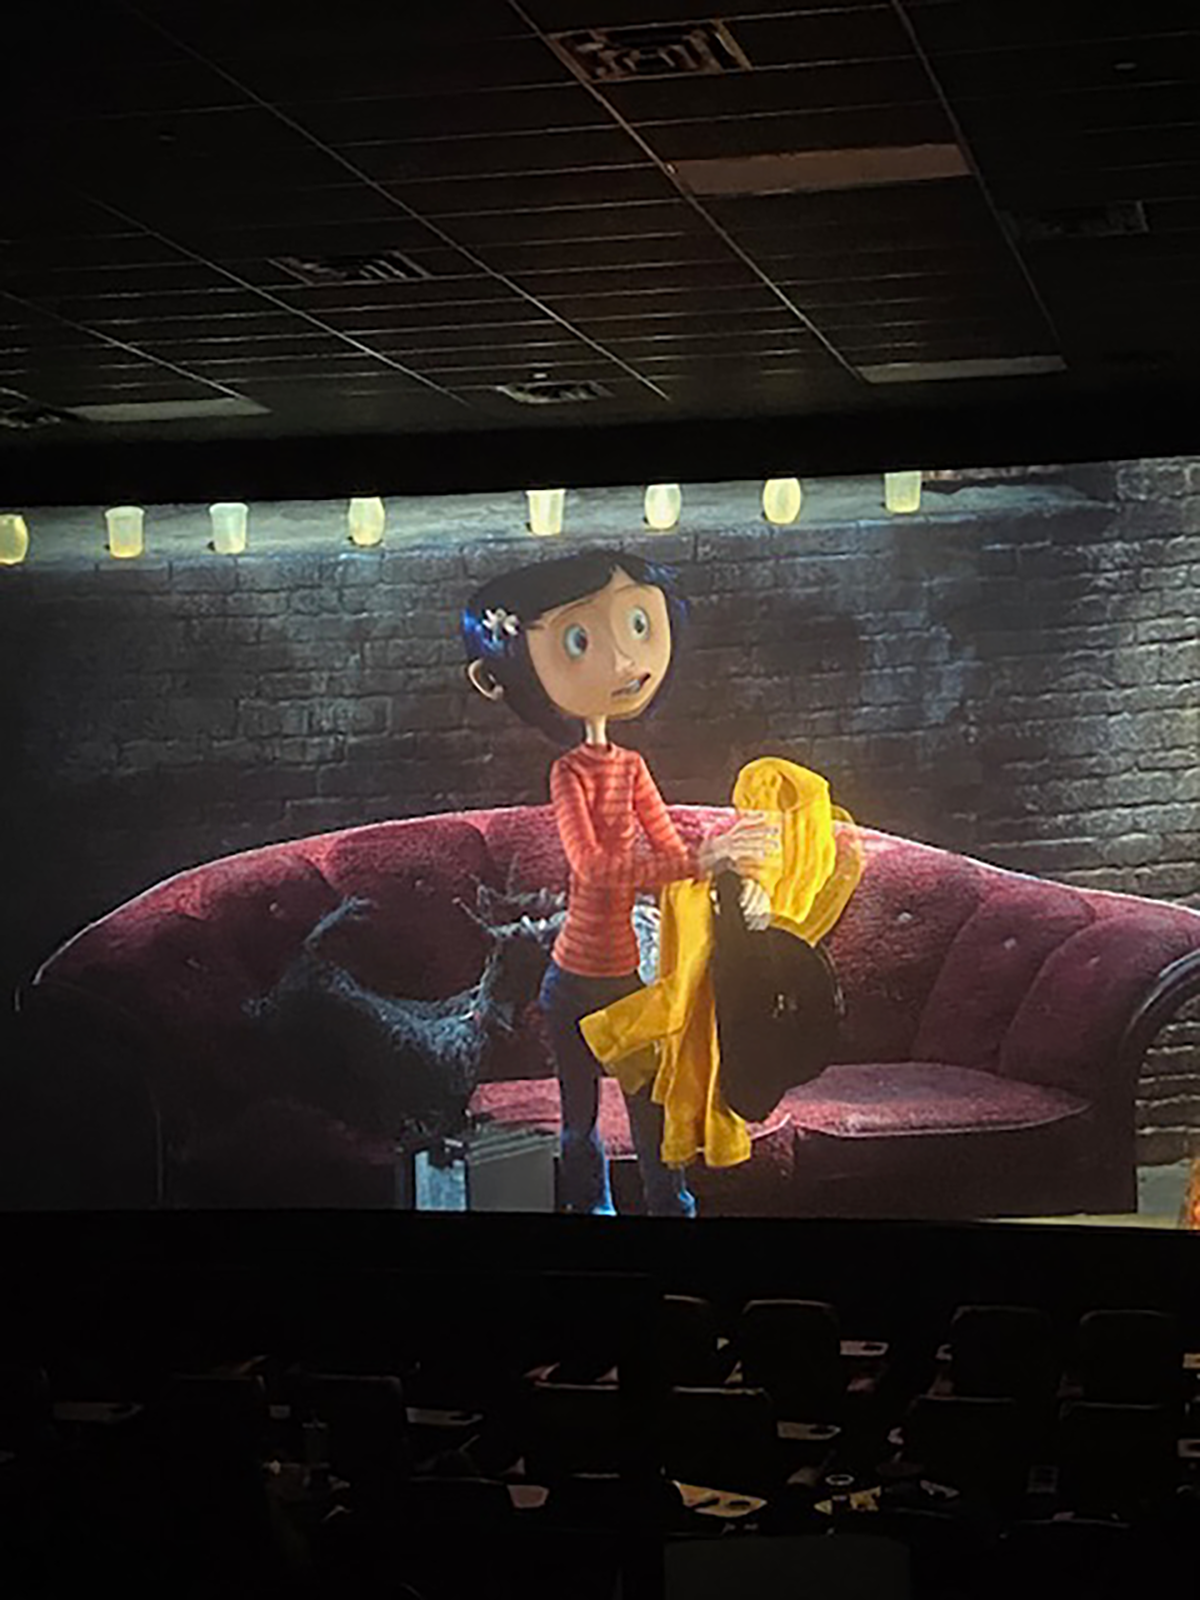 Movie theater view of Coraline.
